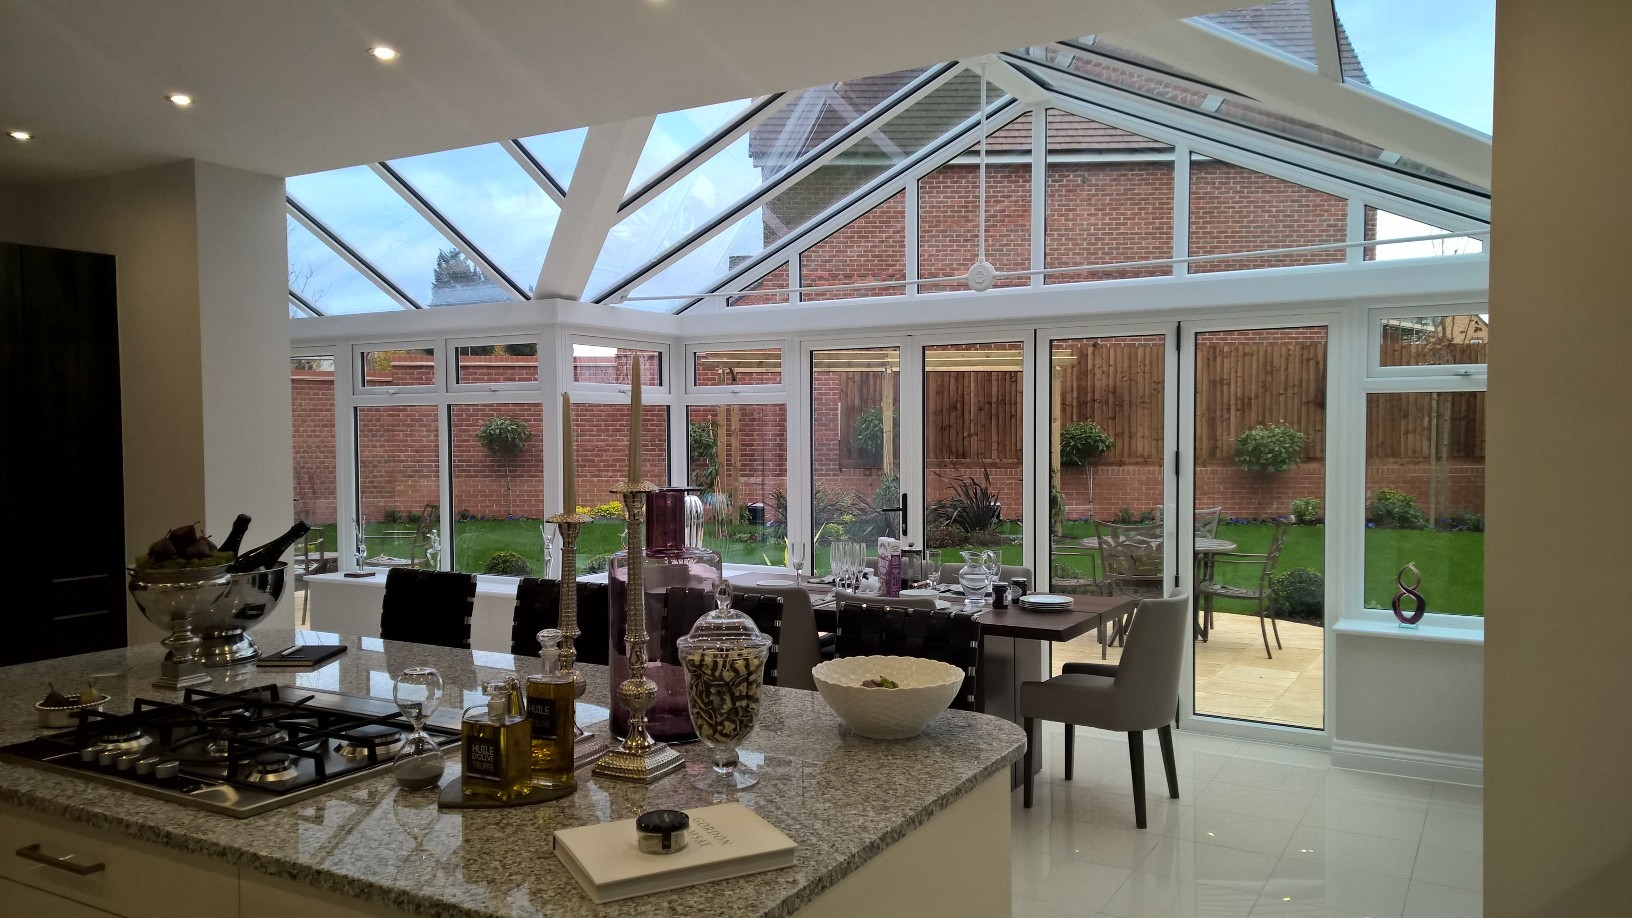 A bespoke uPVC conservatory style housing a kitchen and dining space, with glass roof and glazing looking out into the garden.